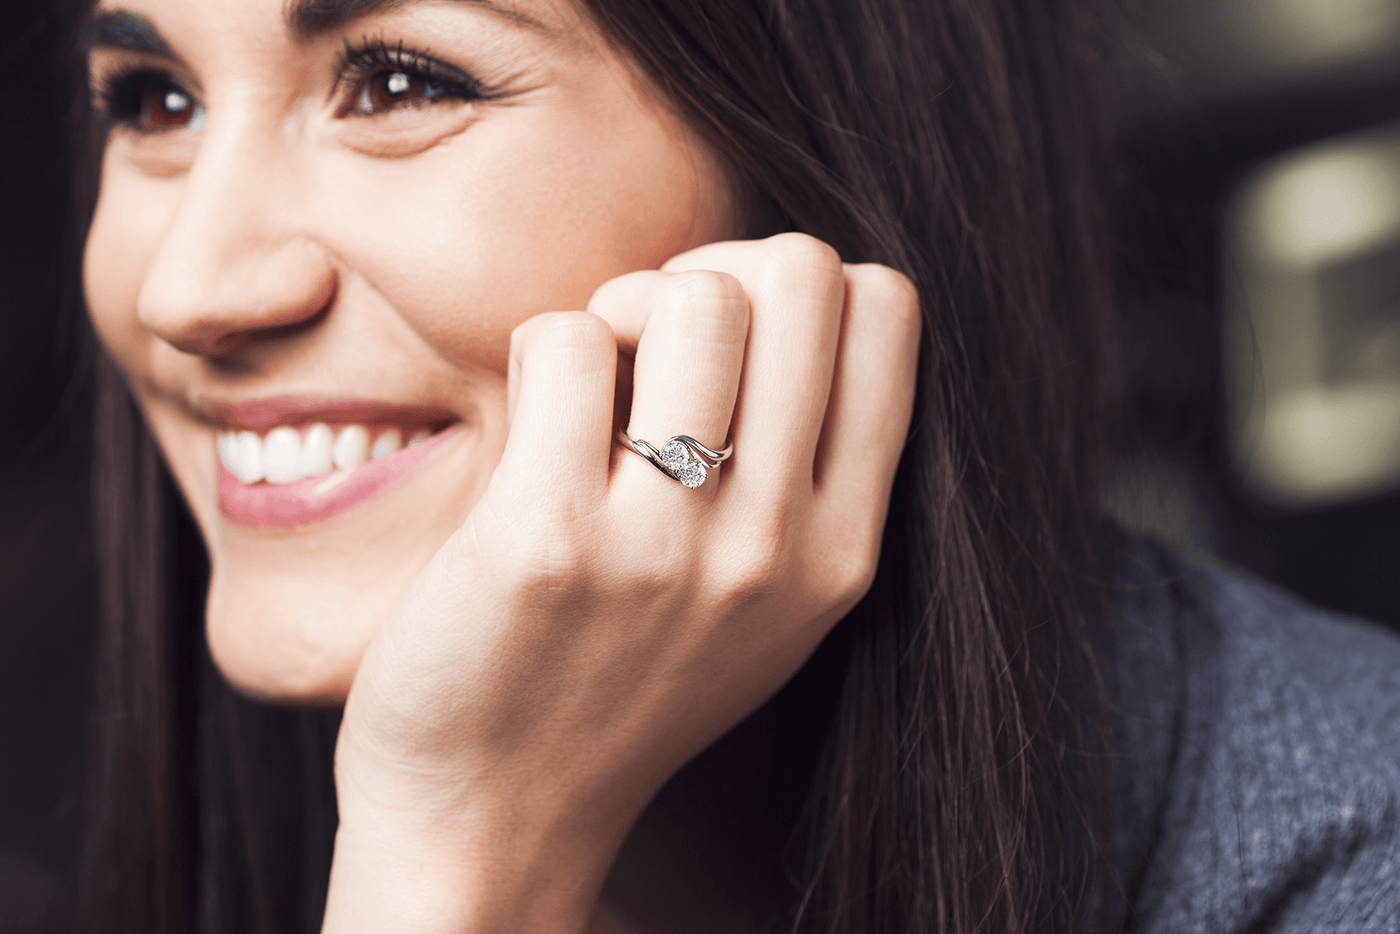 The Latest Trends in Engagement Rings